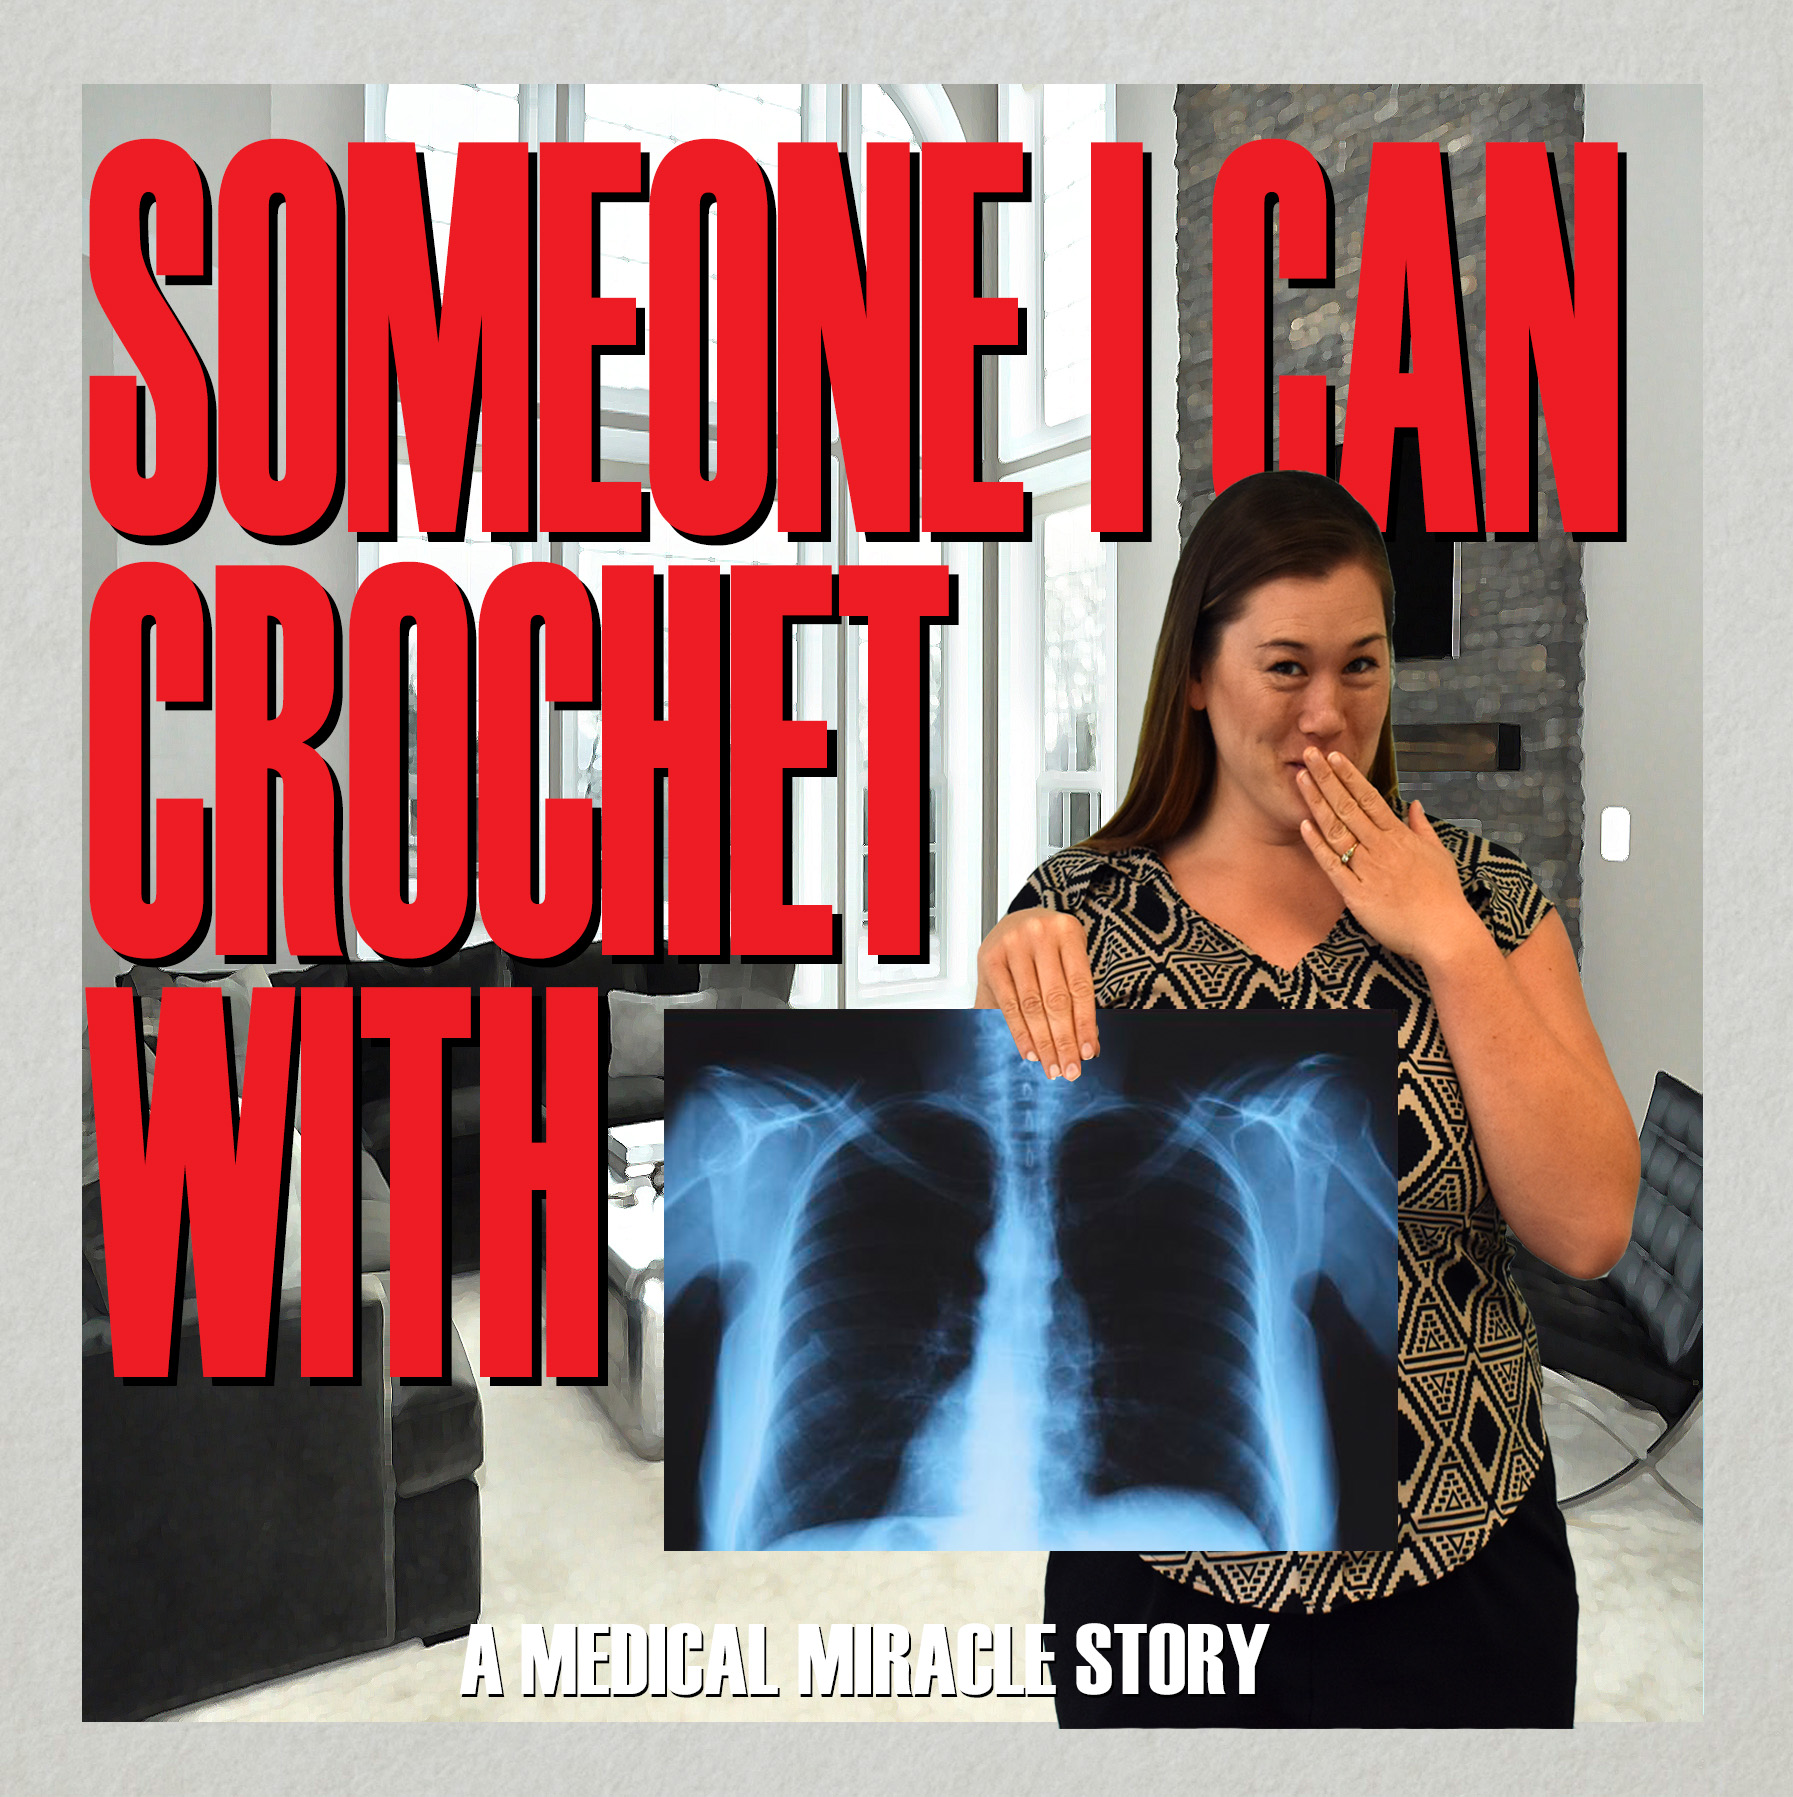 Episode 16: Someone I Can Crochet With